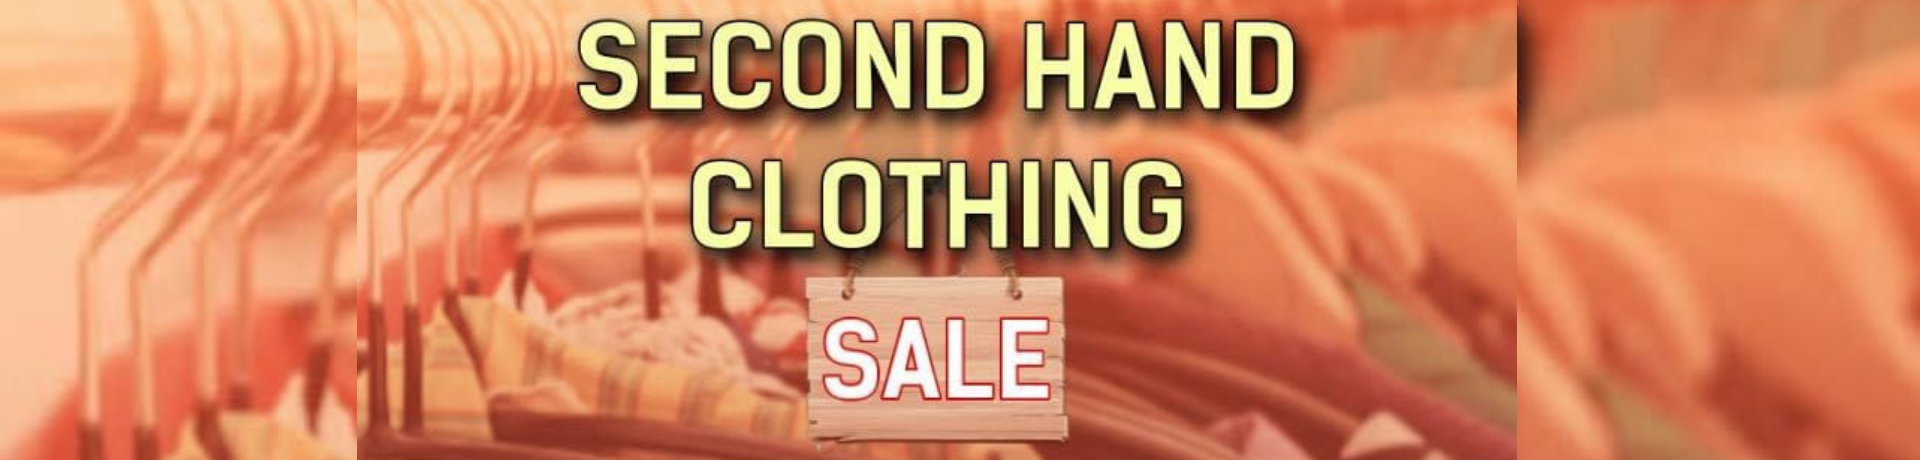 Second hand clothing  sale banner